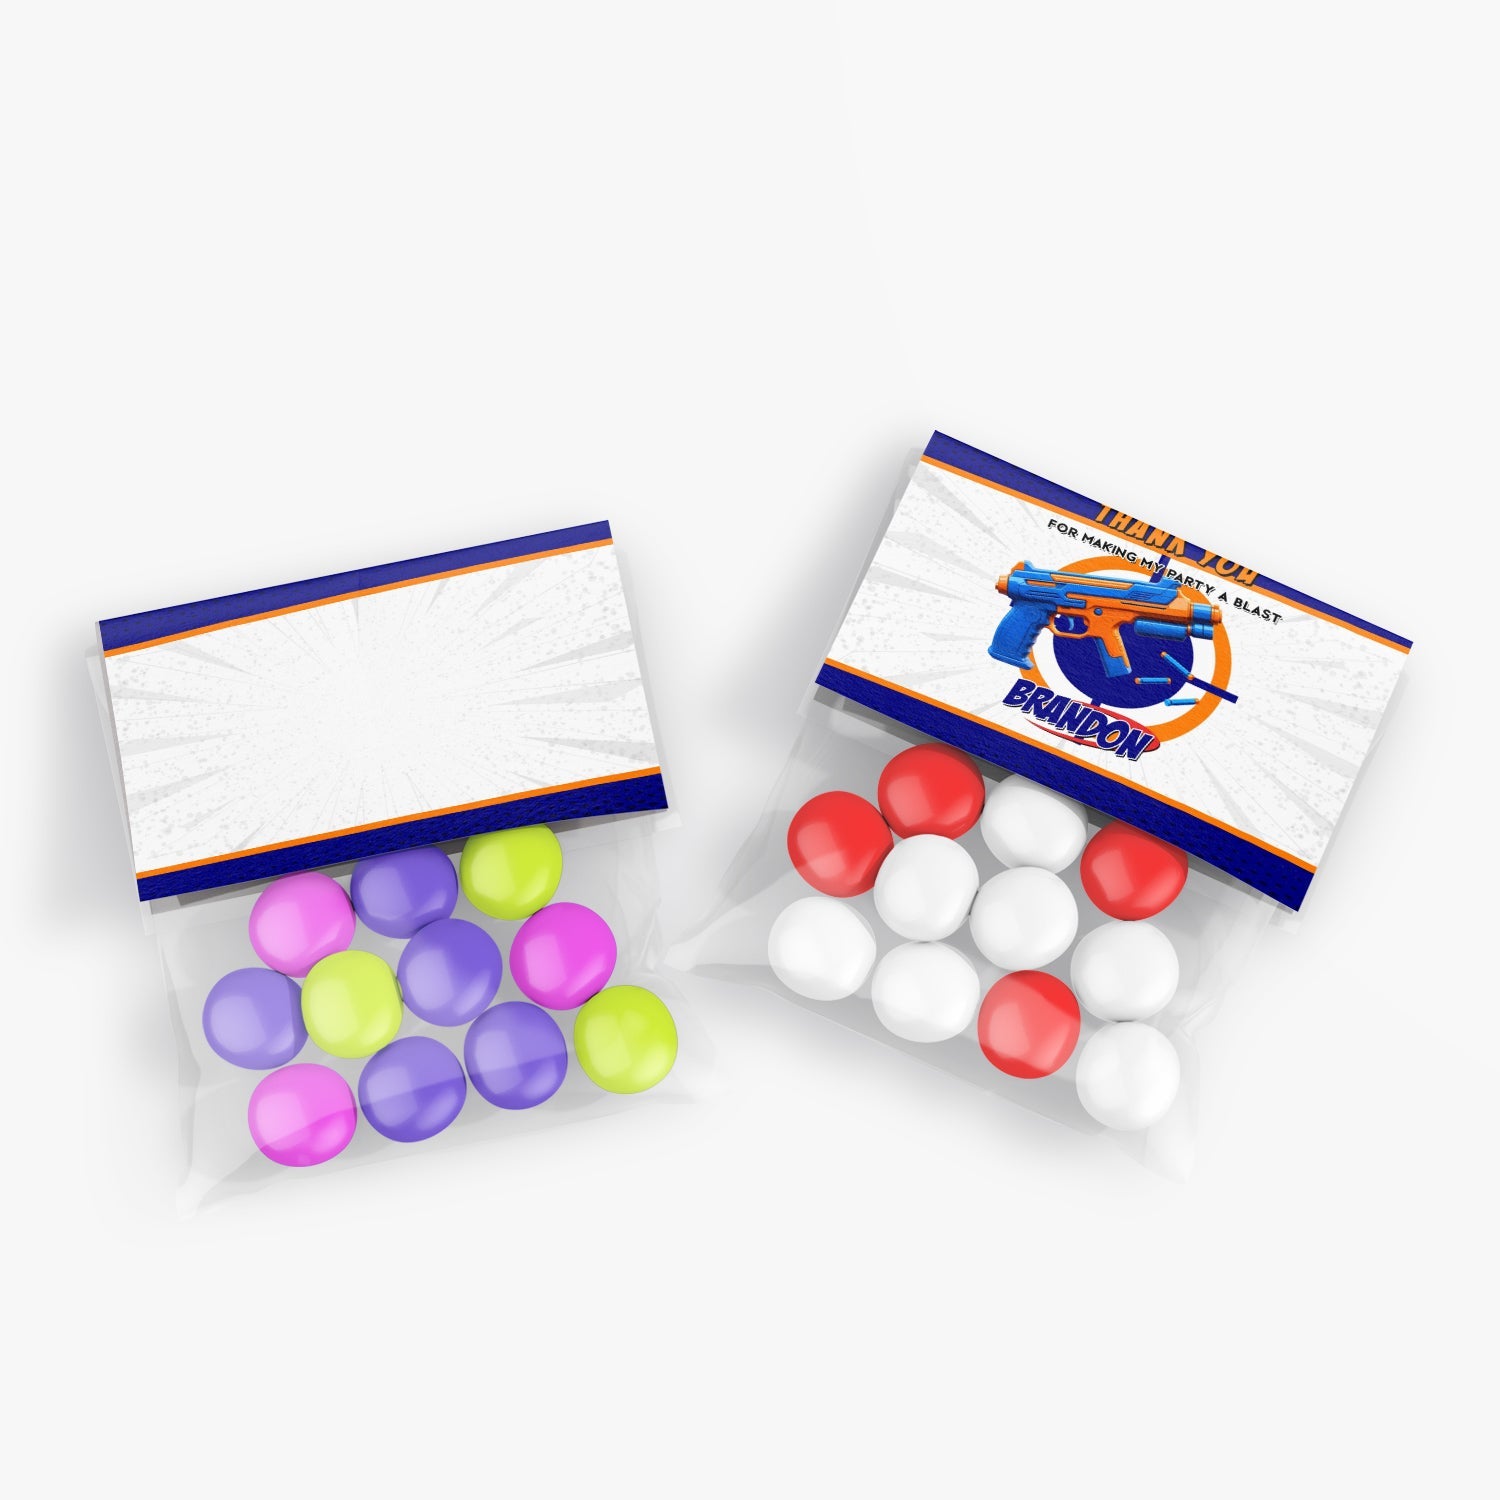 Treat bag label or candy bag label with a Nerf theme, adding a personalized touch to your treats.